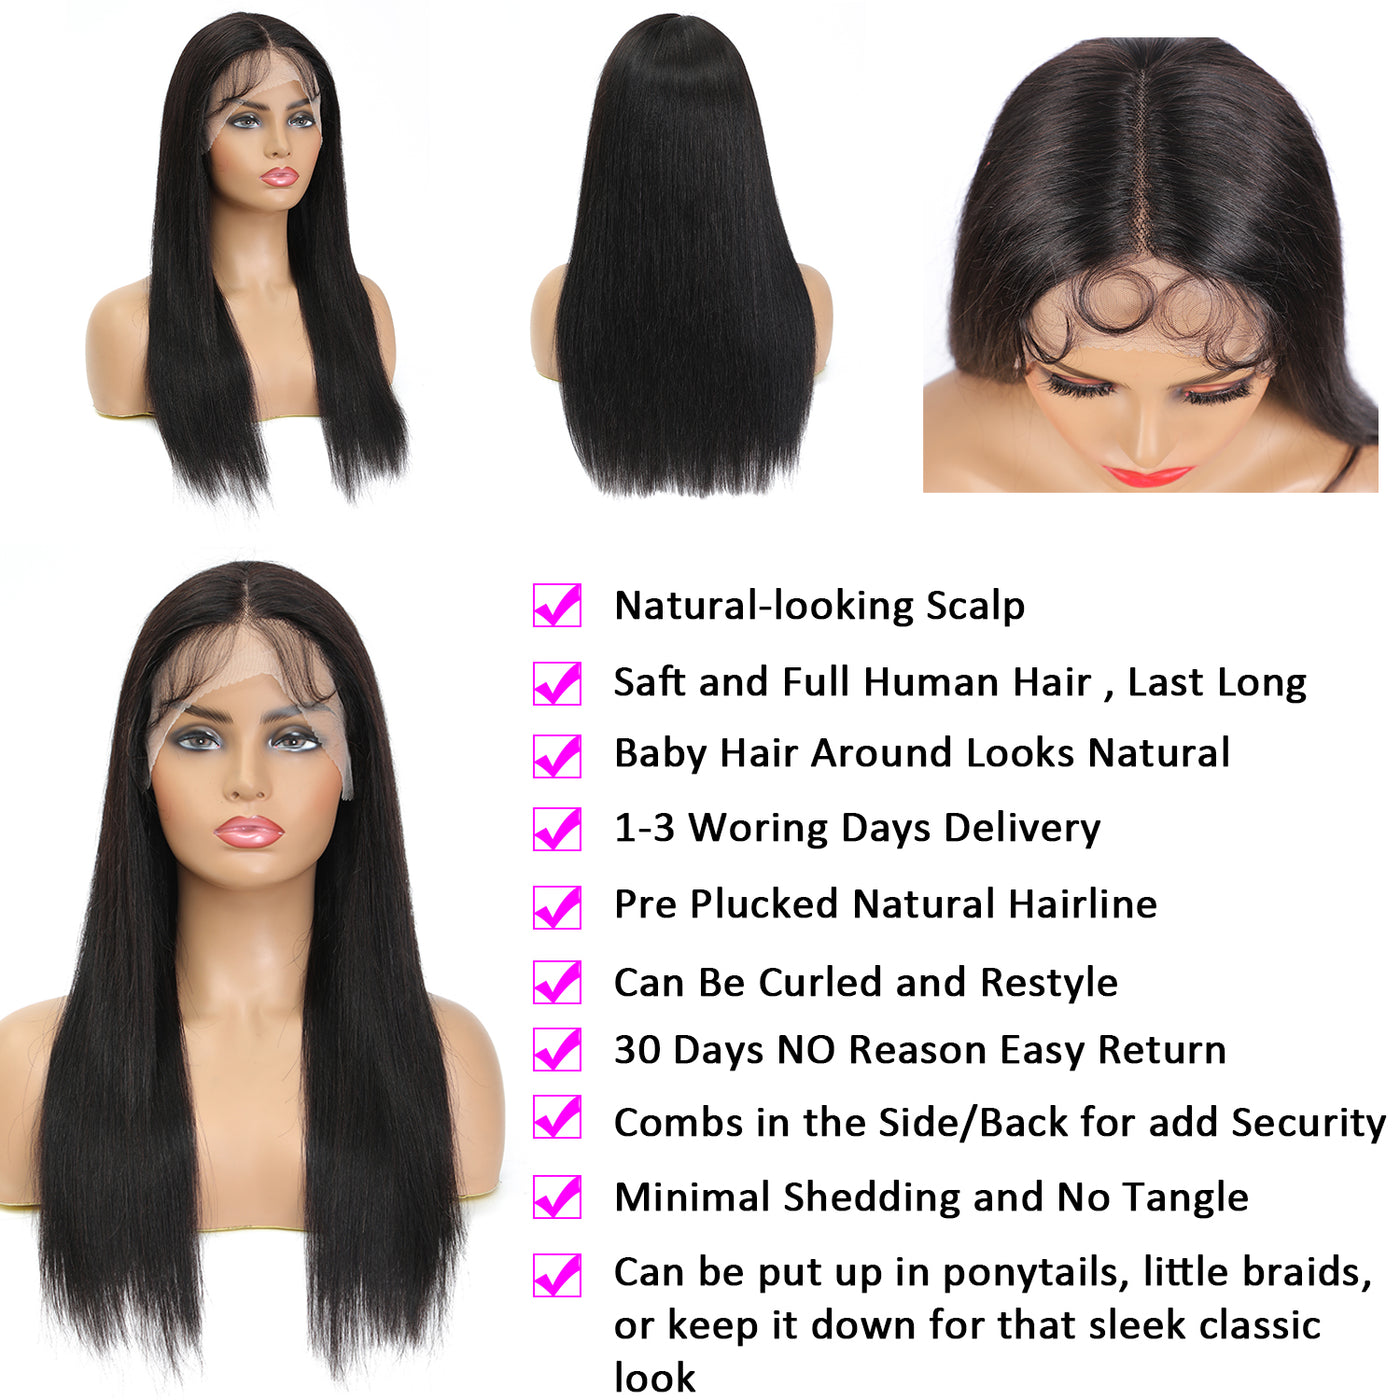 13X4X1 Part Lace Front Wigs Natural Color Human Hair Wig Buy 1 Get 2